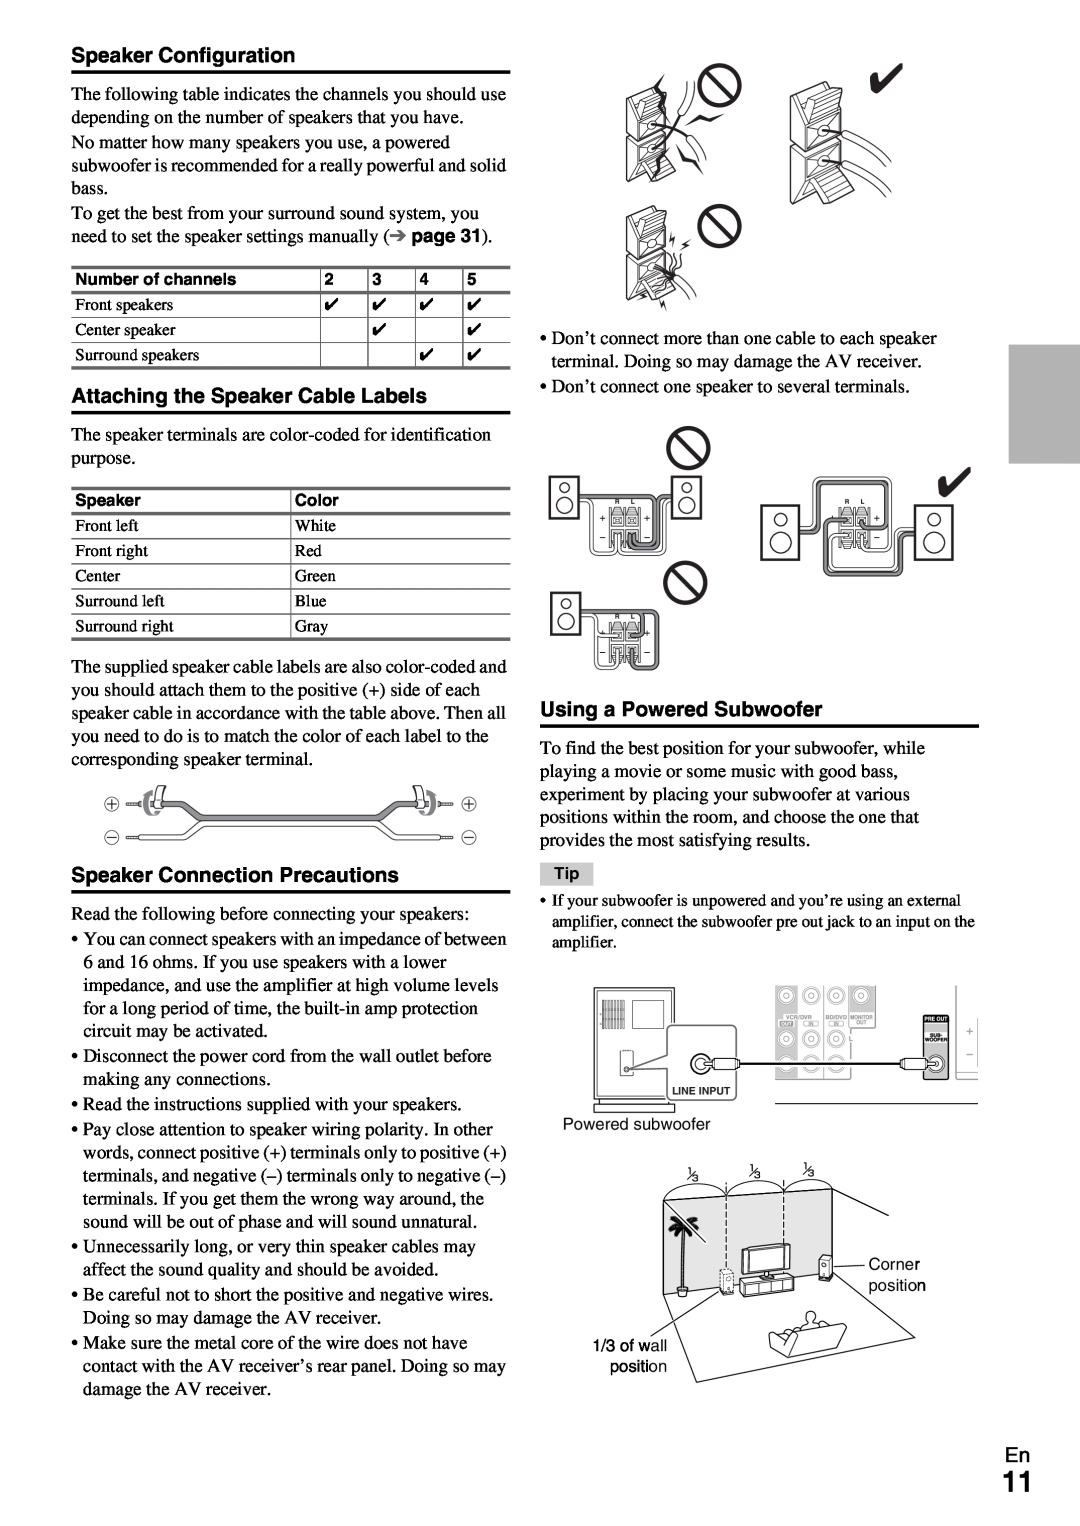 Onkyo HT-RC330 instruction manual Speaker Configuration, Attaching the Speaker Cable Labels, Speaker Connection Precautions 